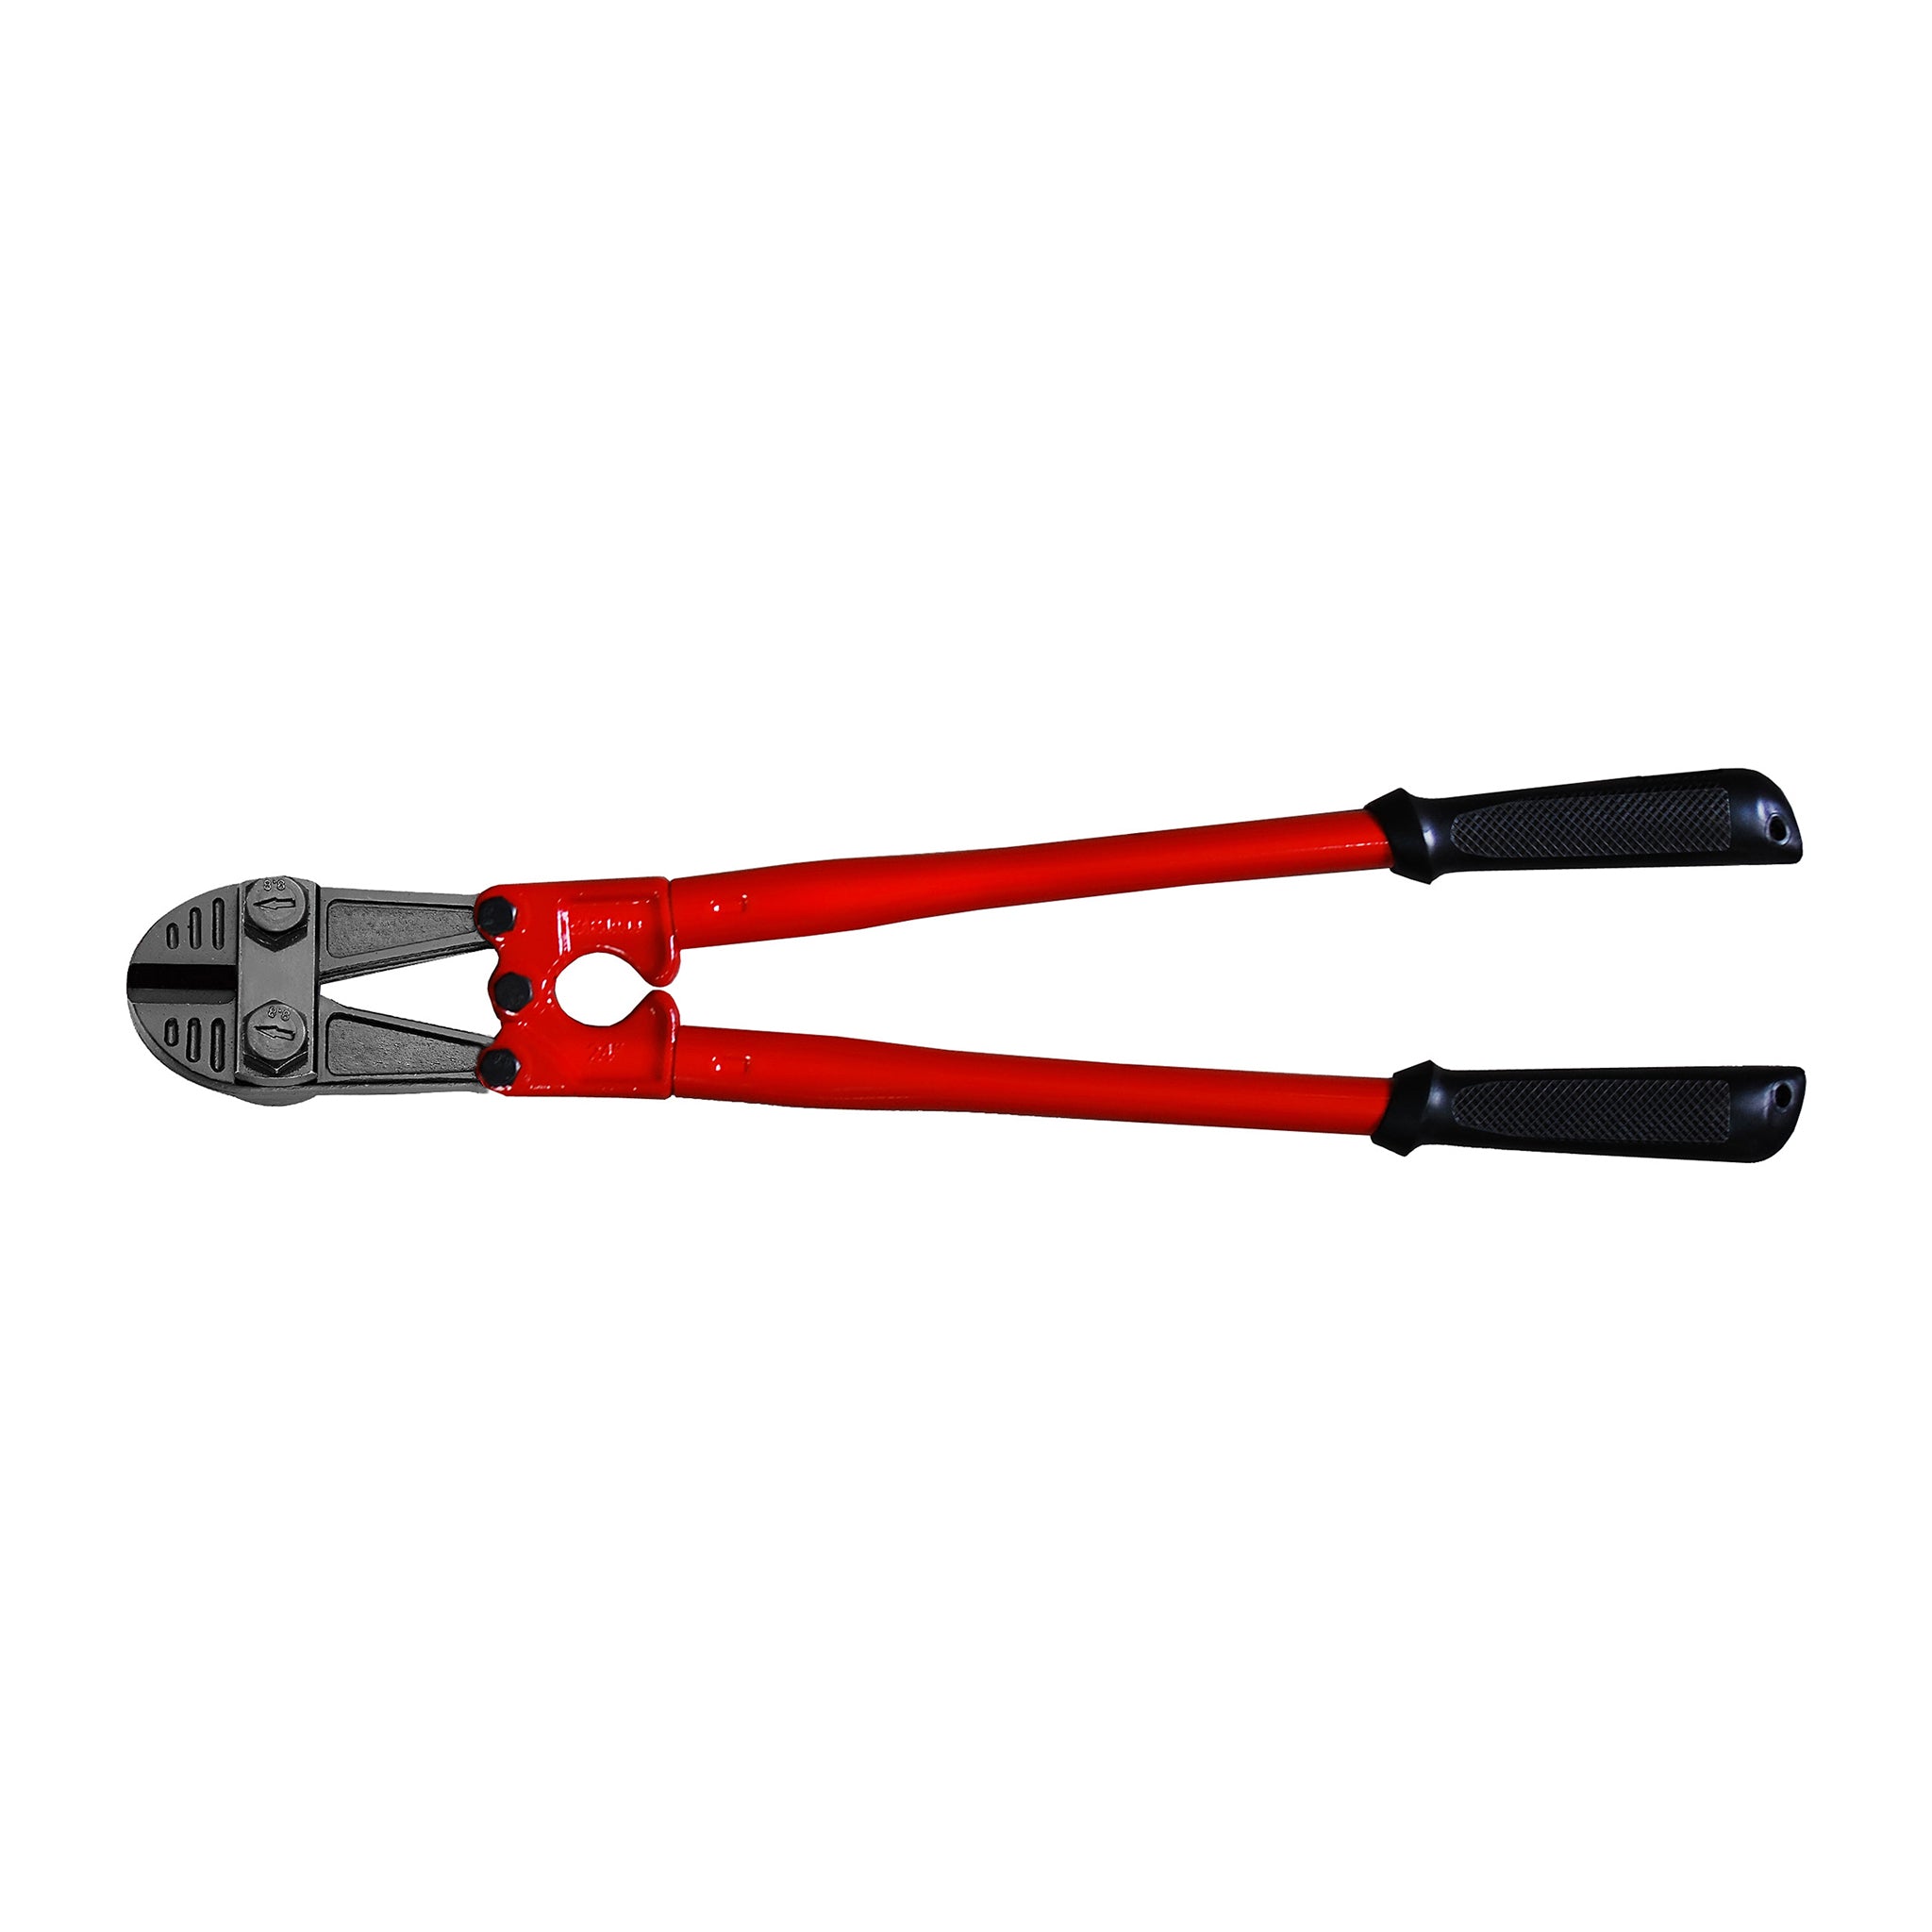 Teng Tools Bolt Cutters With Dipped Handle 8 To 36 Inches - 18 Inch